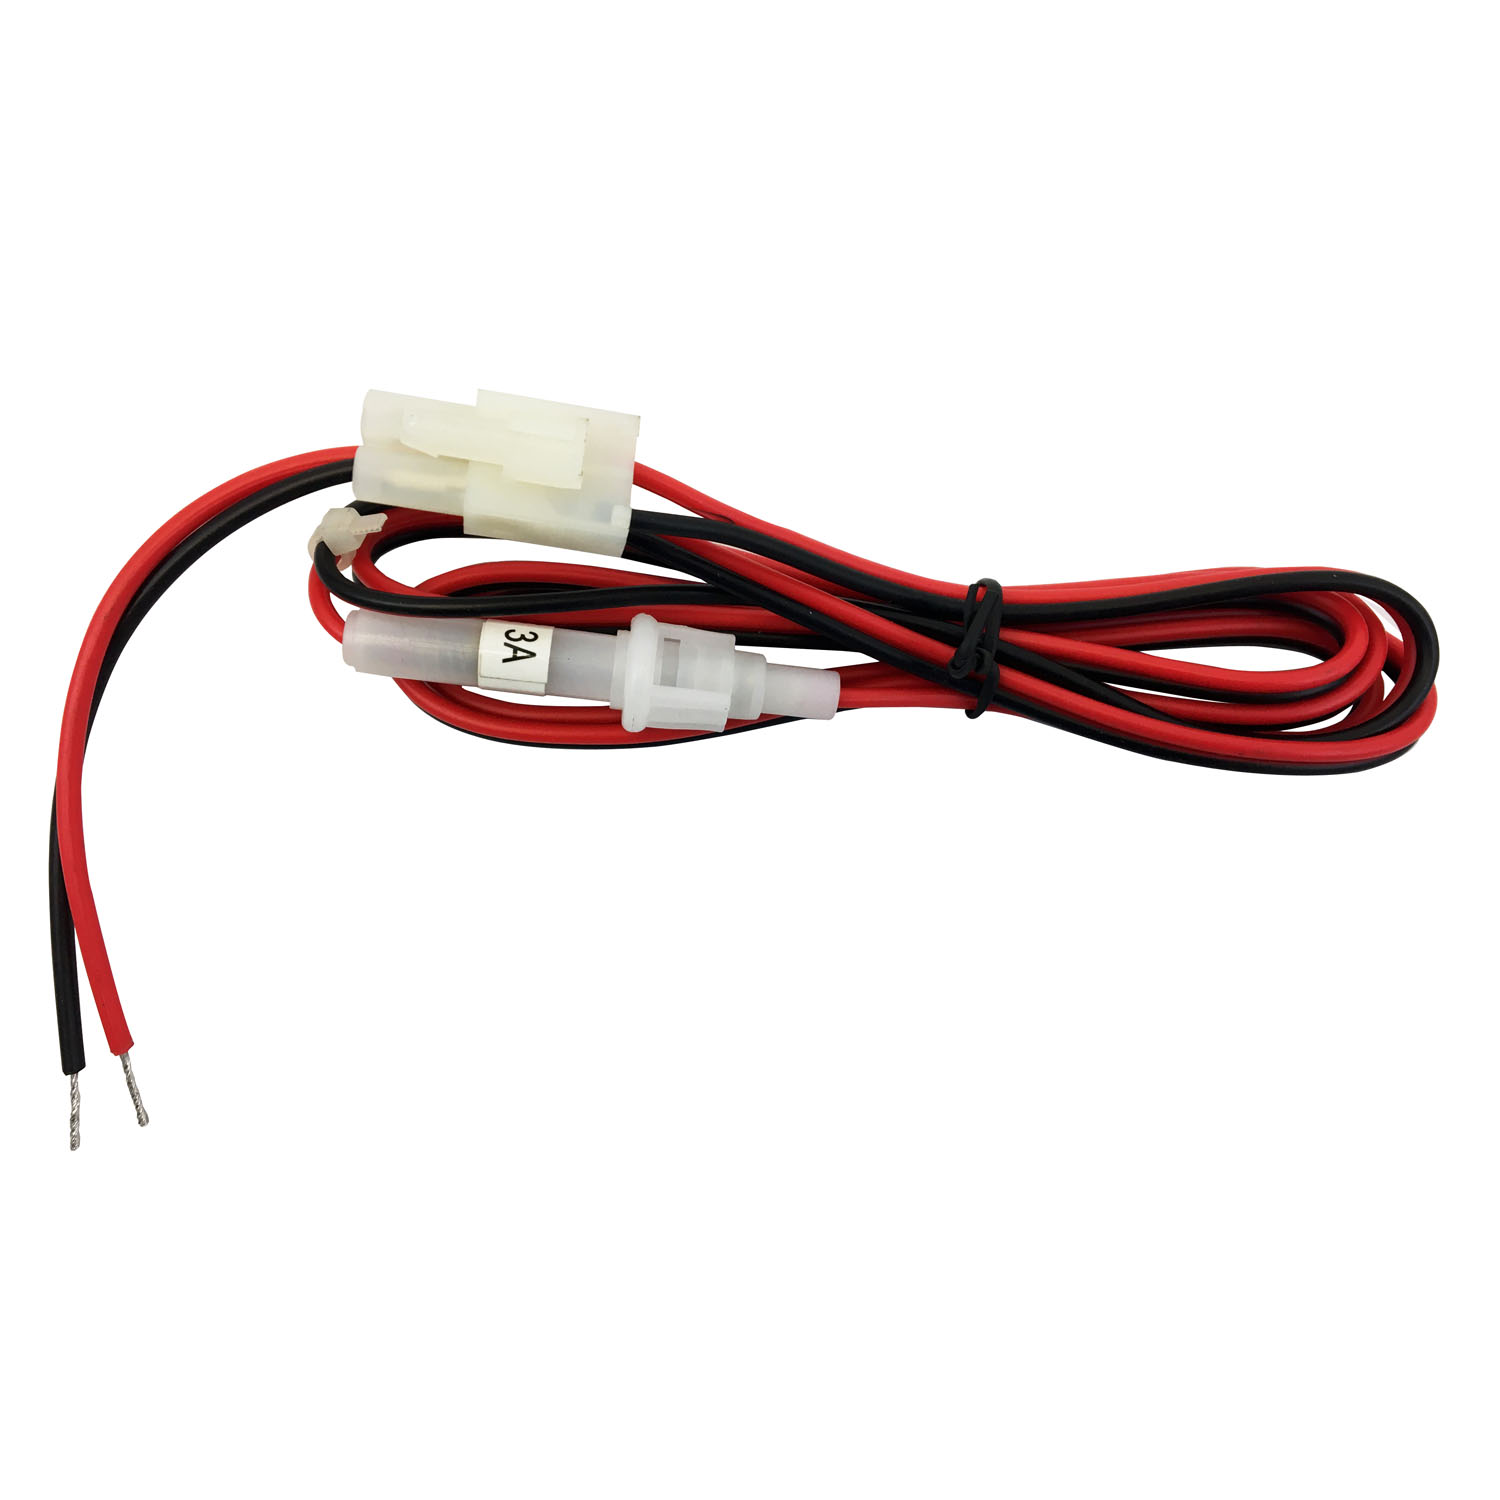 UNIDEN - BWZG1538001 UNIDEN CMX760 2 PIN REPLACEMENT POWER CORD WITH 3 AMP FUSE